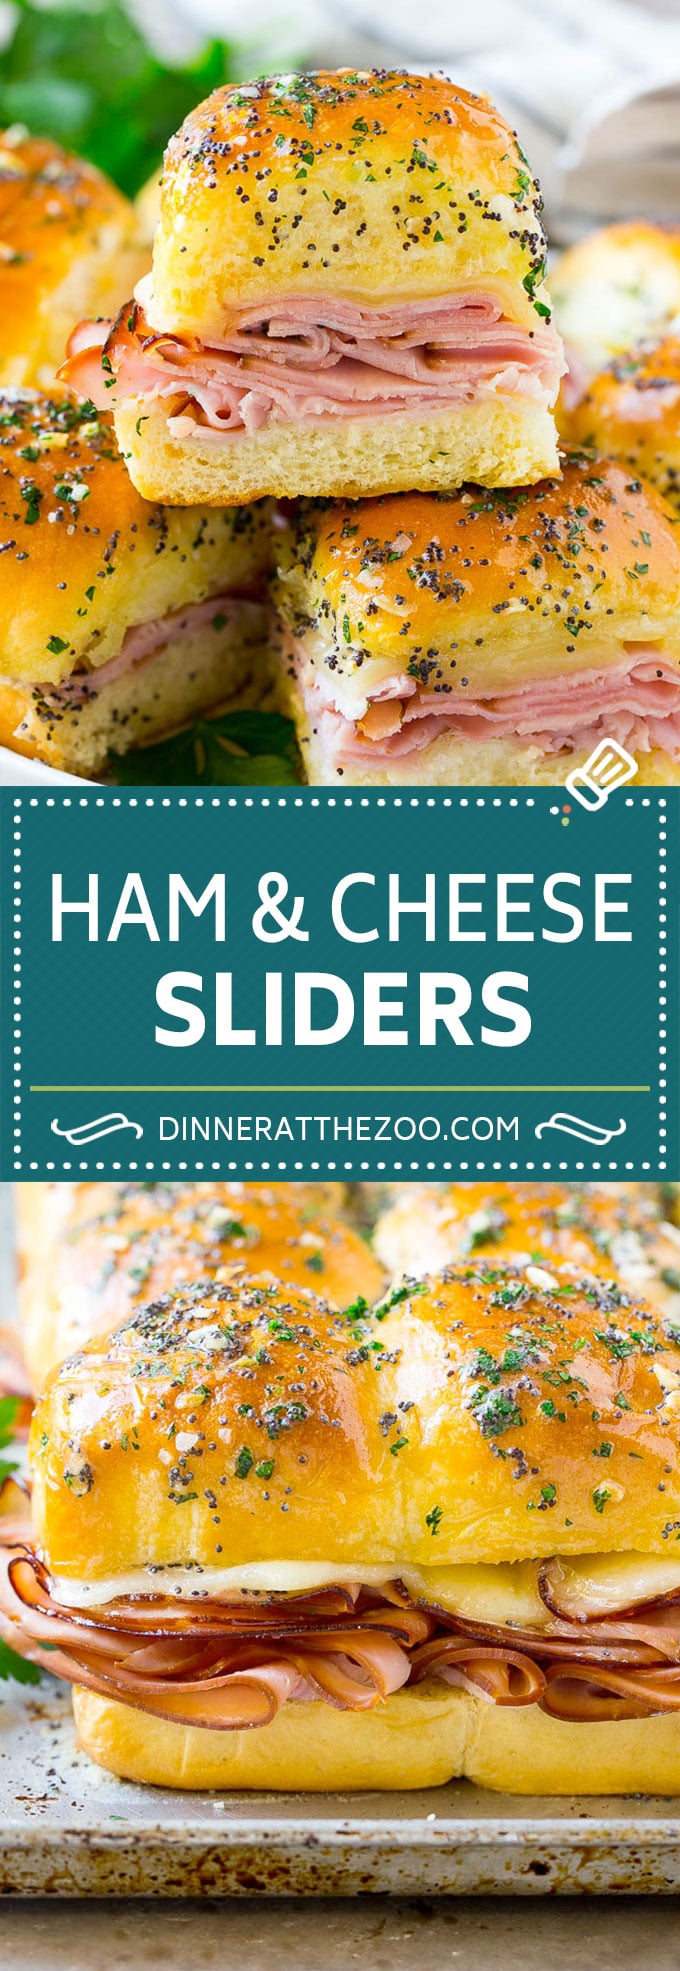 Ham and Cheese Sliders Recipe | Hot Ham and Cheese Sliders | Ham and Cheese Sandwiches #ham #cheese #slider #sandwich #appetizer #snack #dinneratthezoo